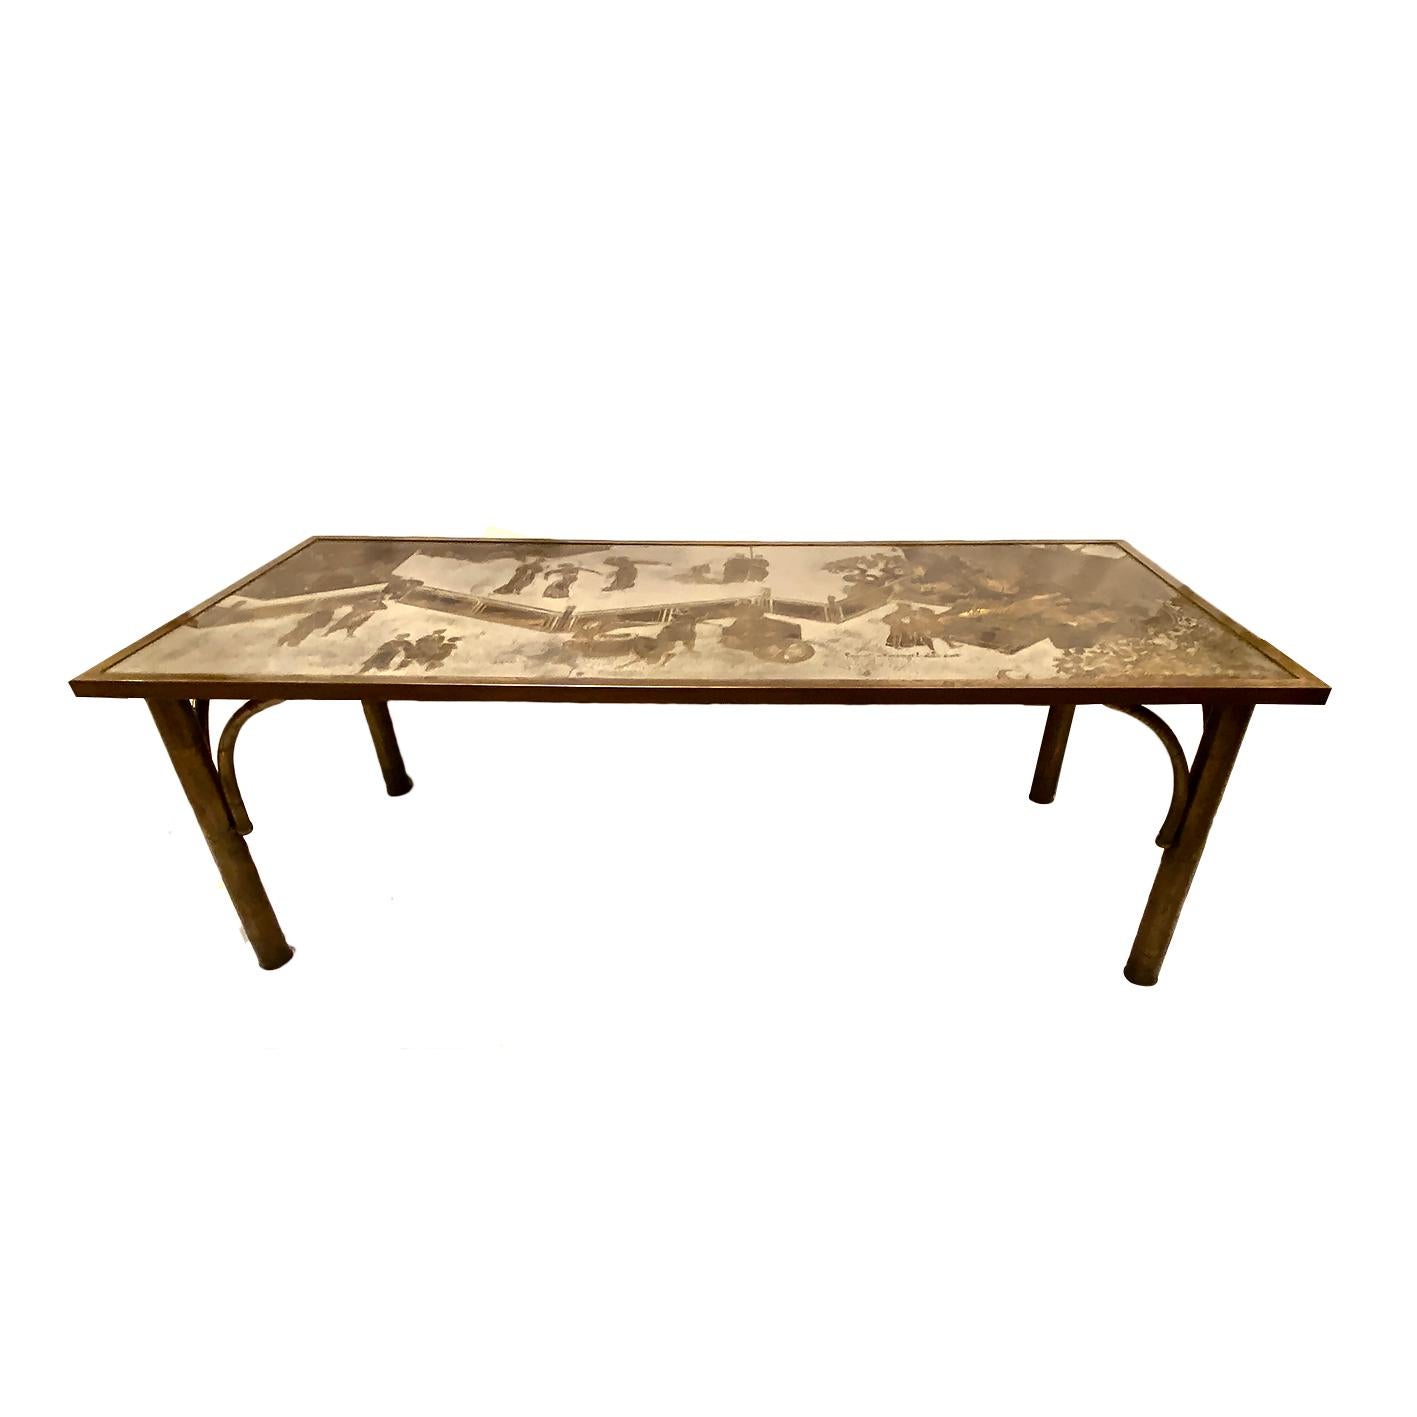 A circa 1960s Laverne coffee table with Asian motif.

Measurements:
Height 17?
Length 47.75?
Depth 20?.